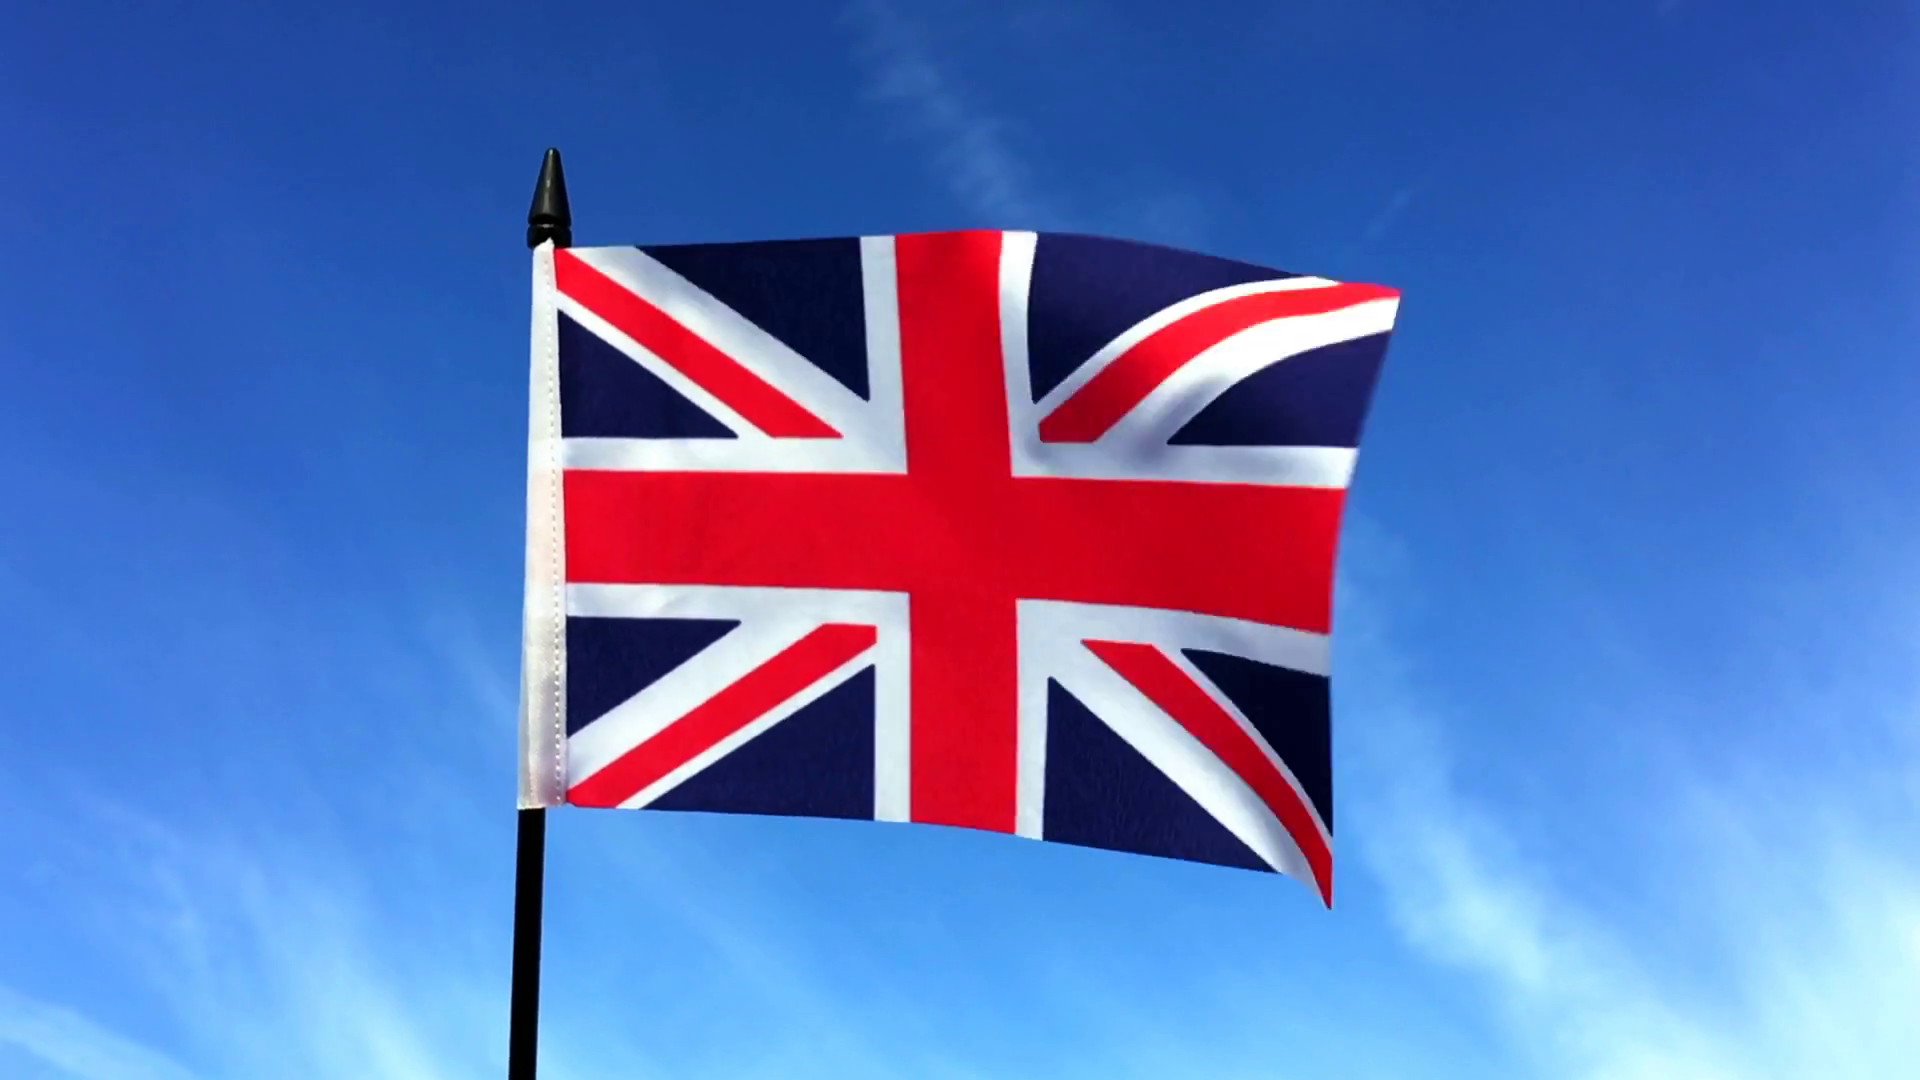 The national flag of Great Britain Union Jack is fluttering in the ...